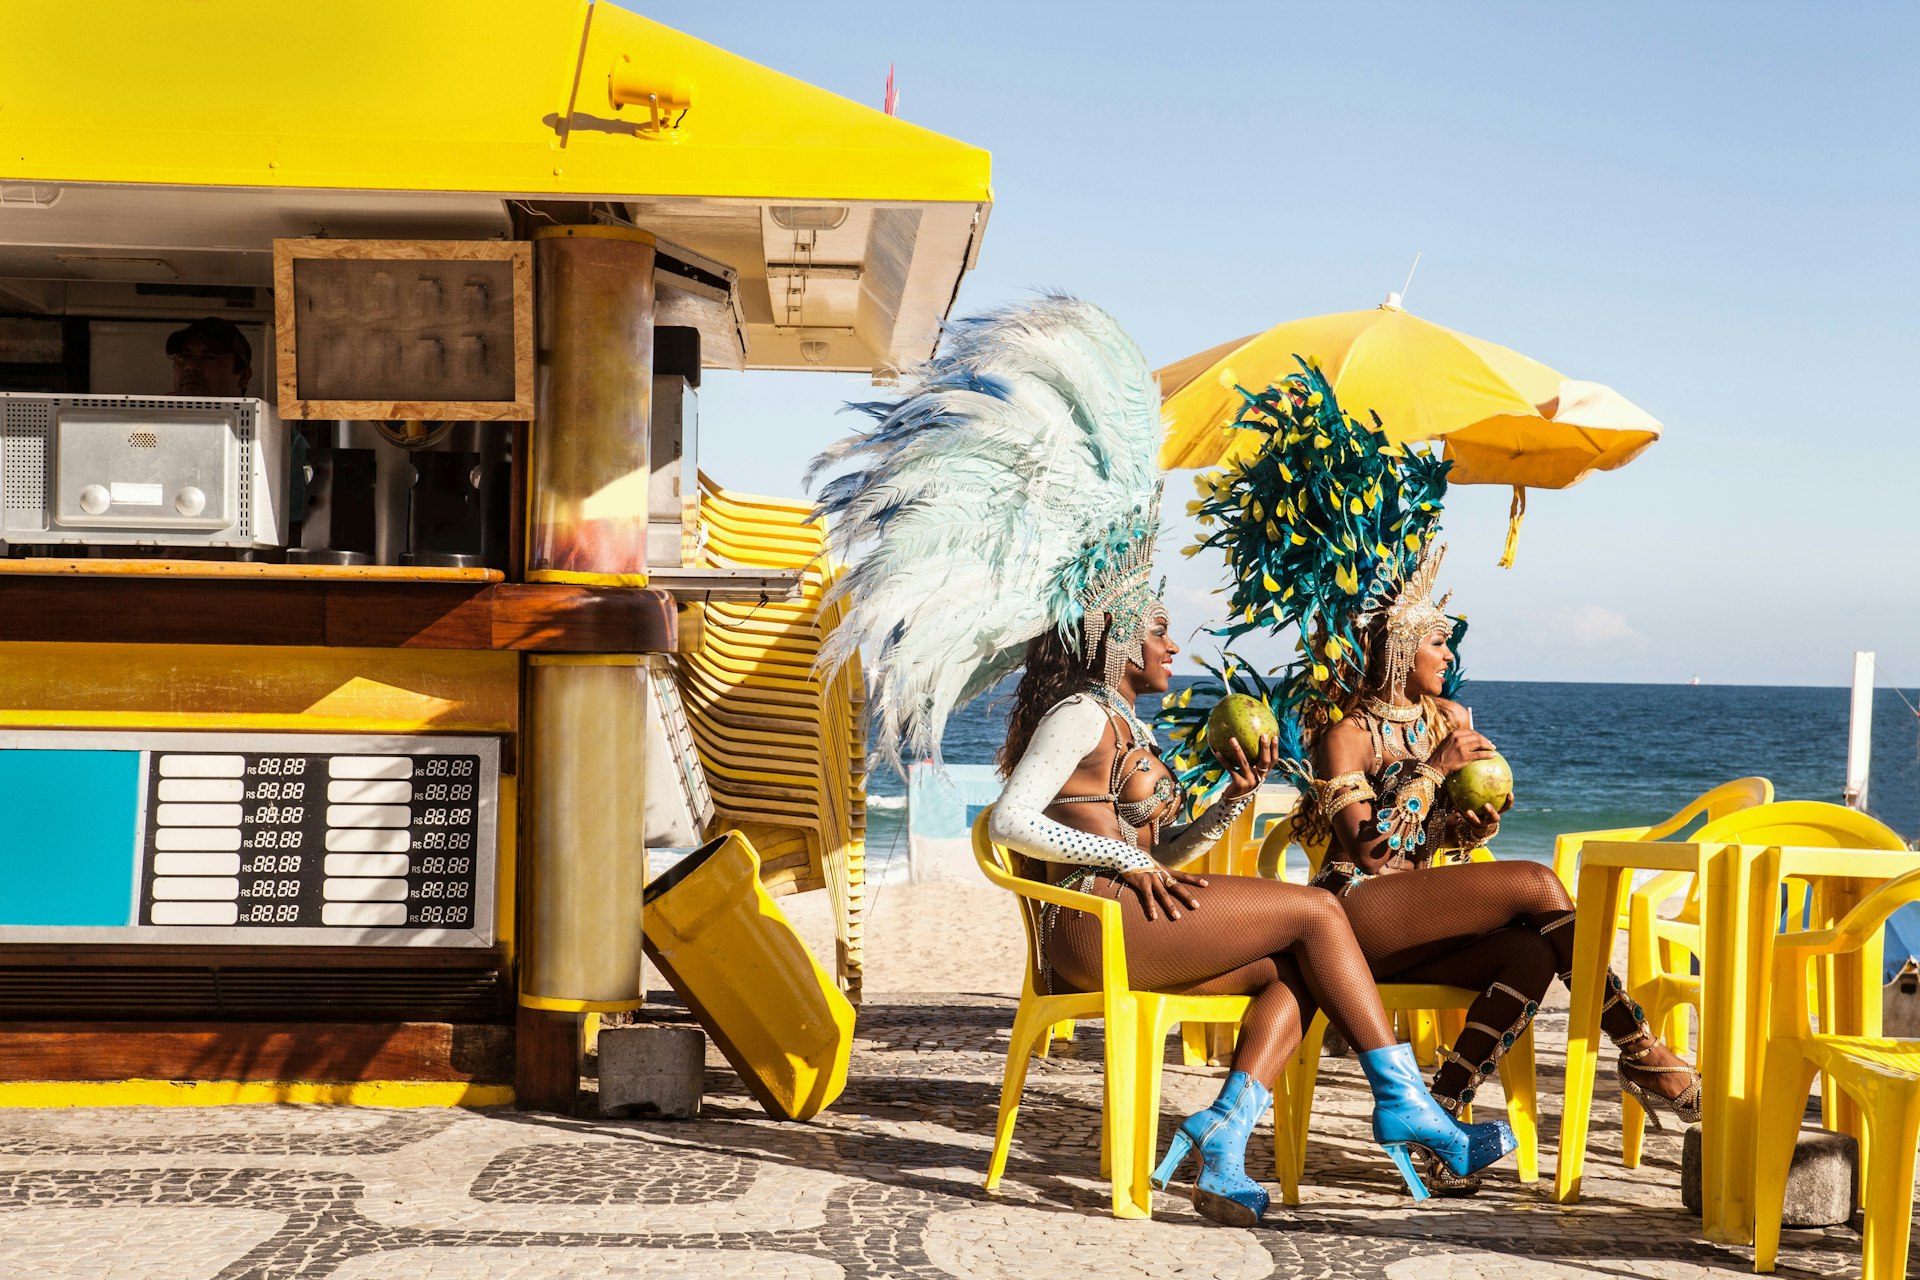 This image features two samba dancers taking a break at Ipanema Beach in Rio de Janeiro. They are seated on yellow chairs under a yellow umbrella, adjacent to a snack bar with a blue and yellow facade. The dancers are adorned with elaborate carnival costumes with feathers in hues of blue, green, and yellow. They appear relaxed, enjoying coconuts, with the ocean in the background and a clear blue sky above. The scene captures the vibrant and festive atmosphere typical of Rio's Carnaval.